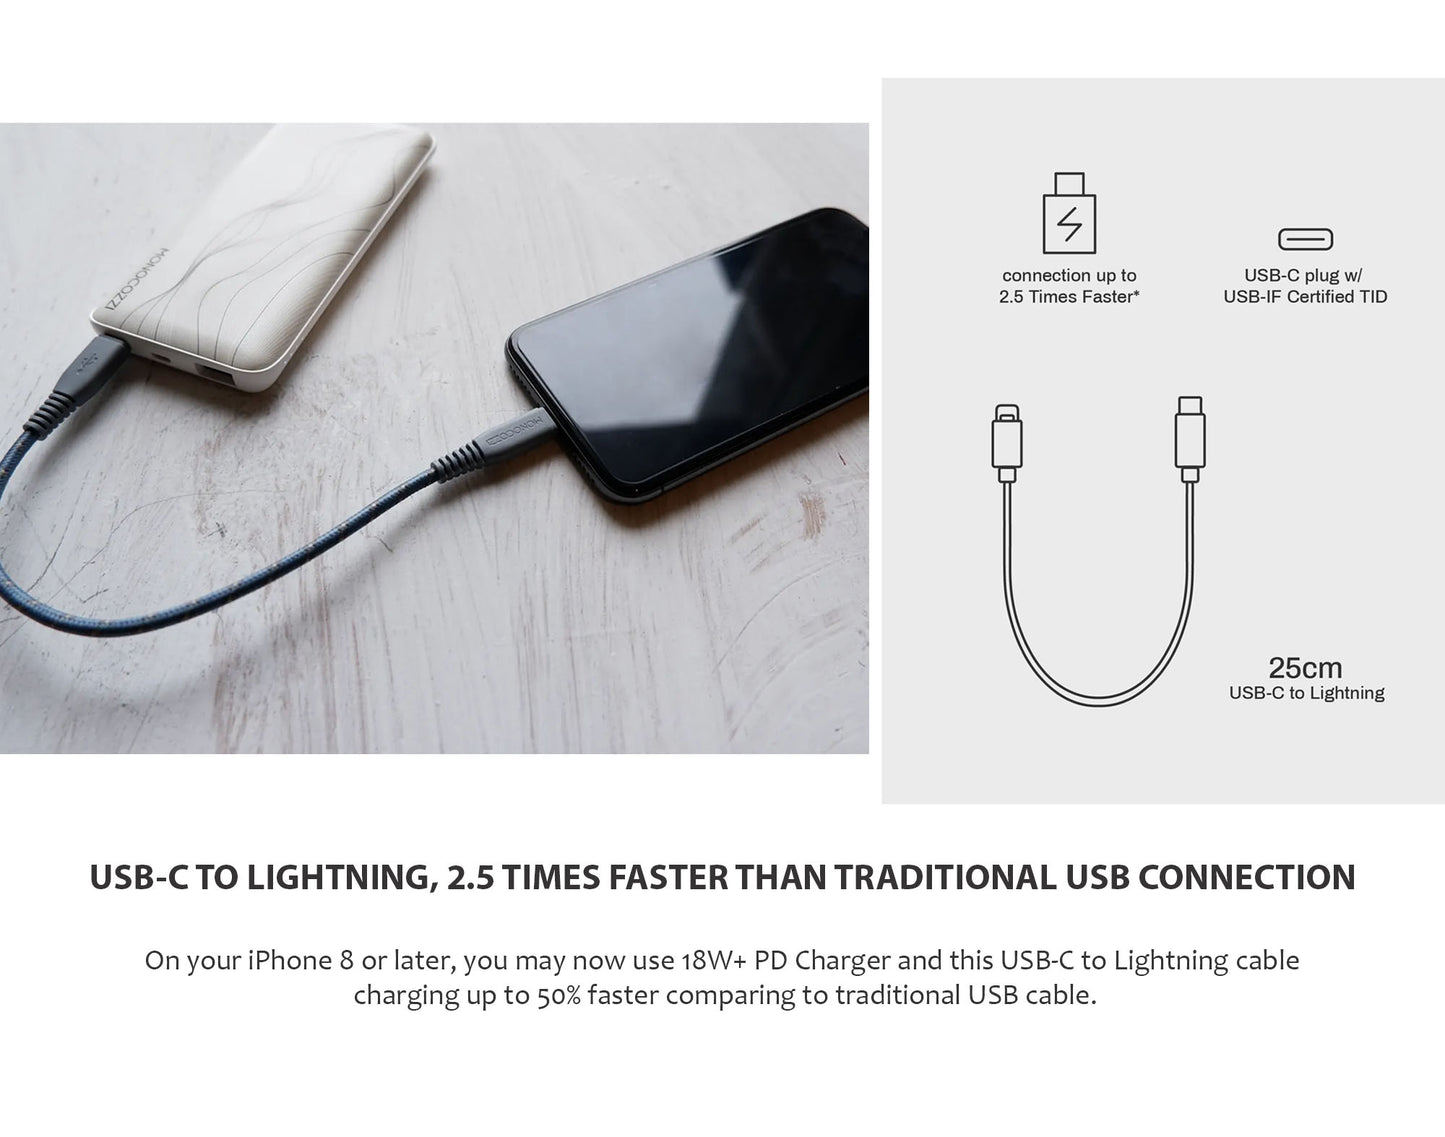 Monocozzi Motif Braided USB-C to Lightning Cable ( 25cm ) - Charcoal (Barcode: 4895199105355 )